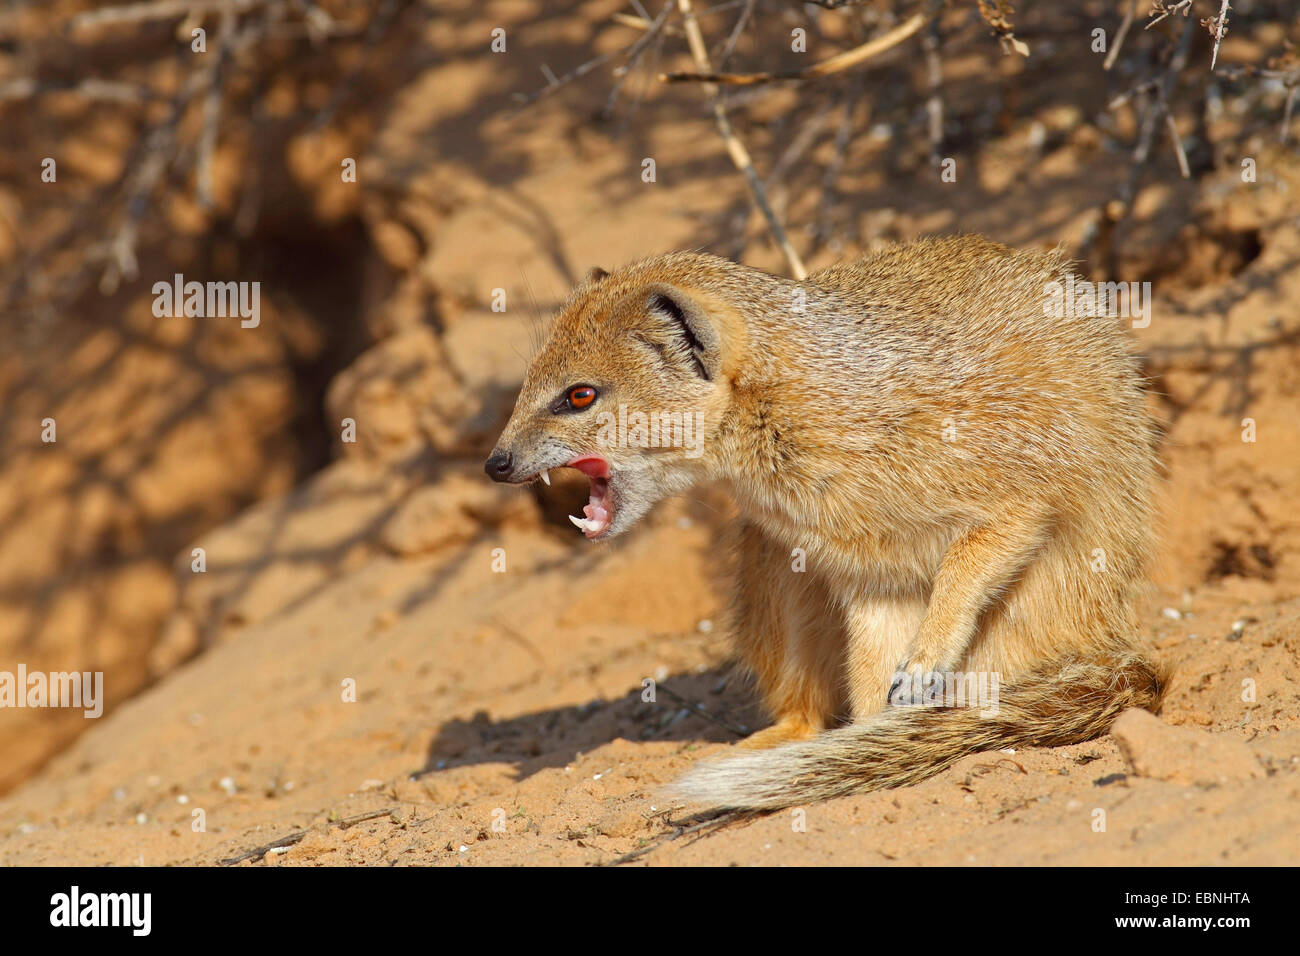 yellow mongoose (Cynictis penicillata), mongoose sitting in the sand and shows the teeth, South Africa, Kgalagadi Transfrontier National Park Stock Photo